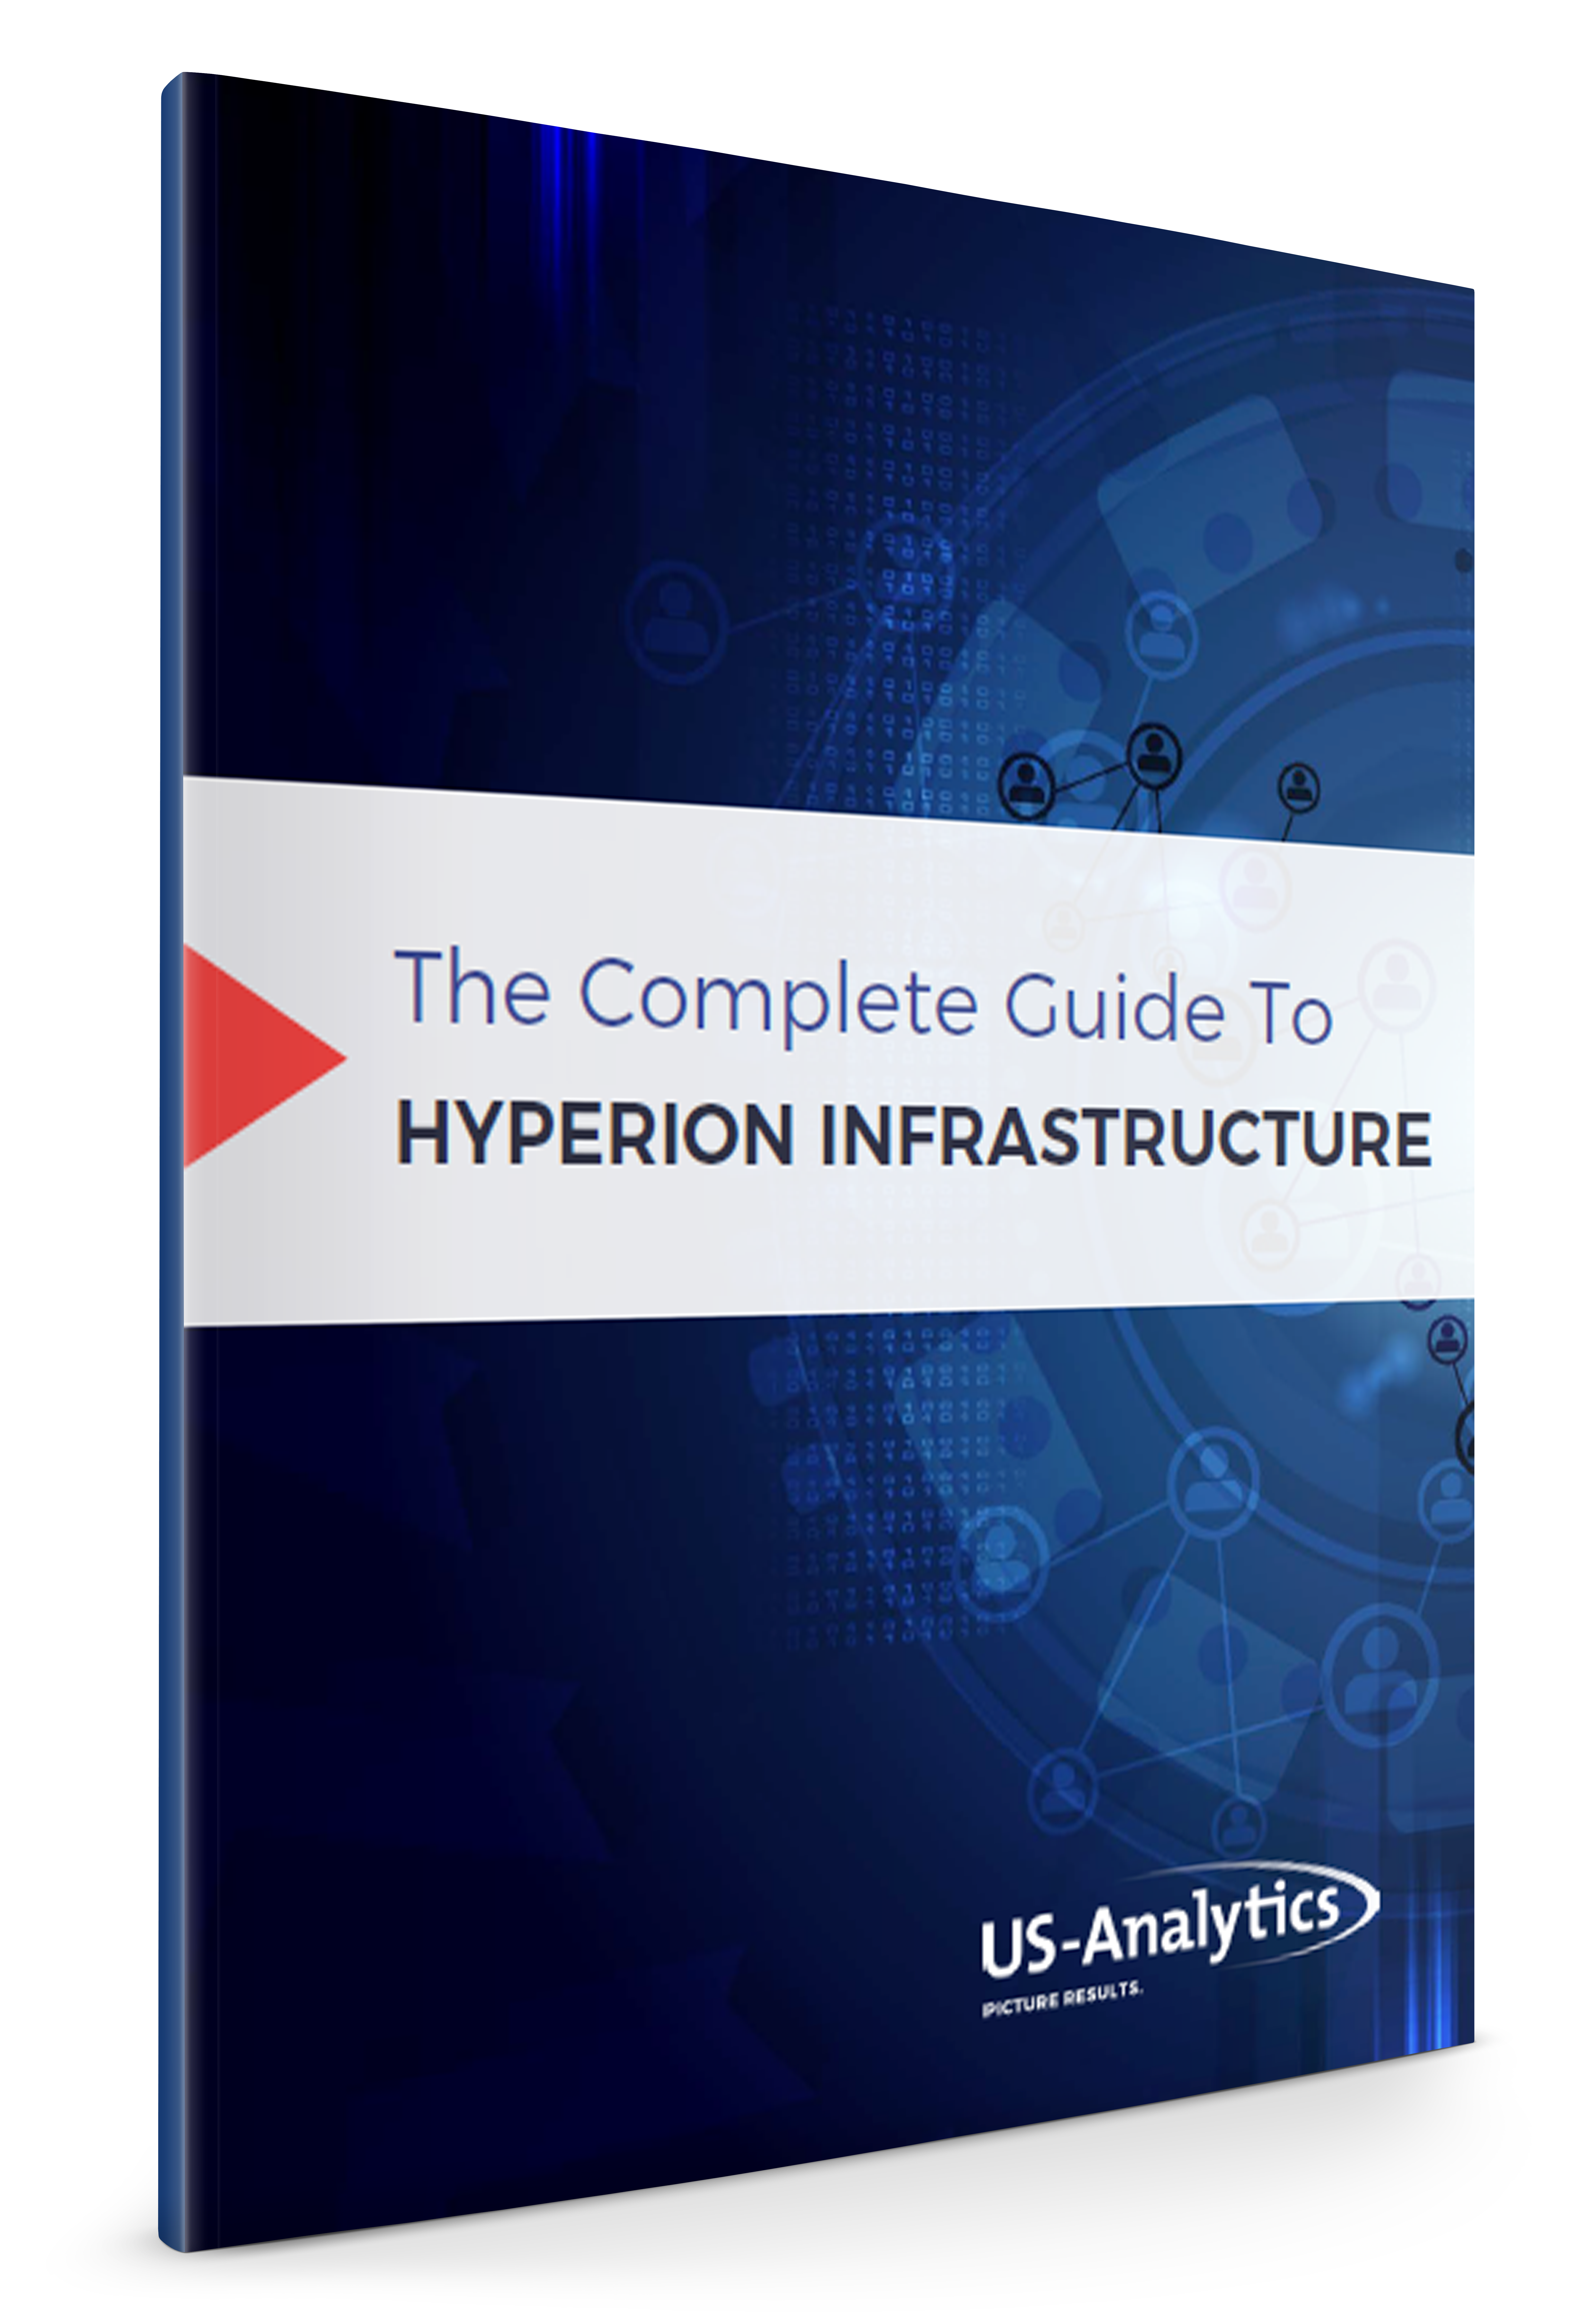 the complete guide to hyperion infrastructure_landing page-1-1